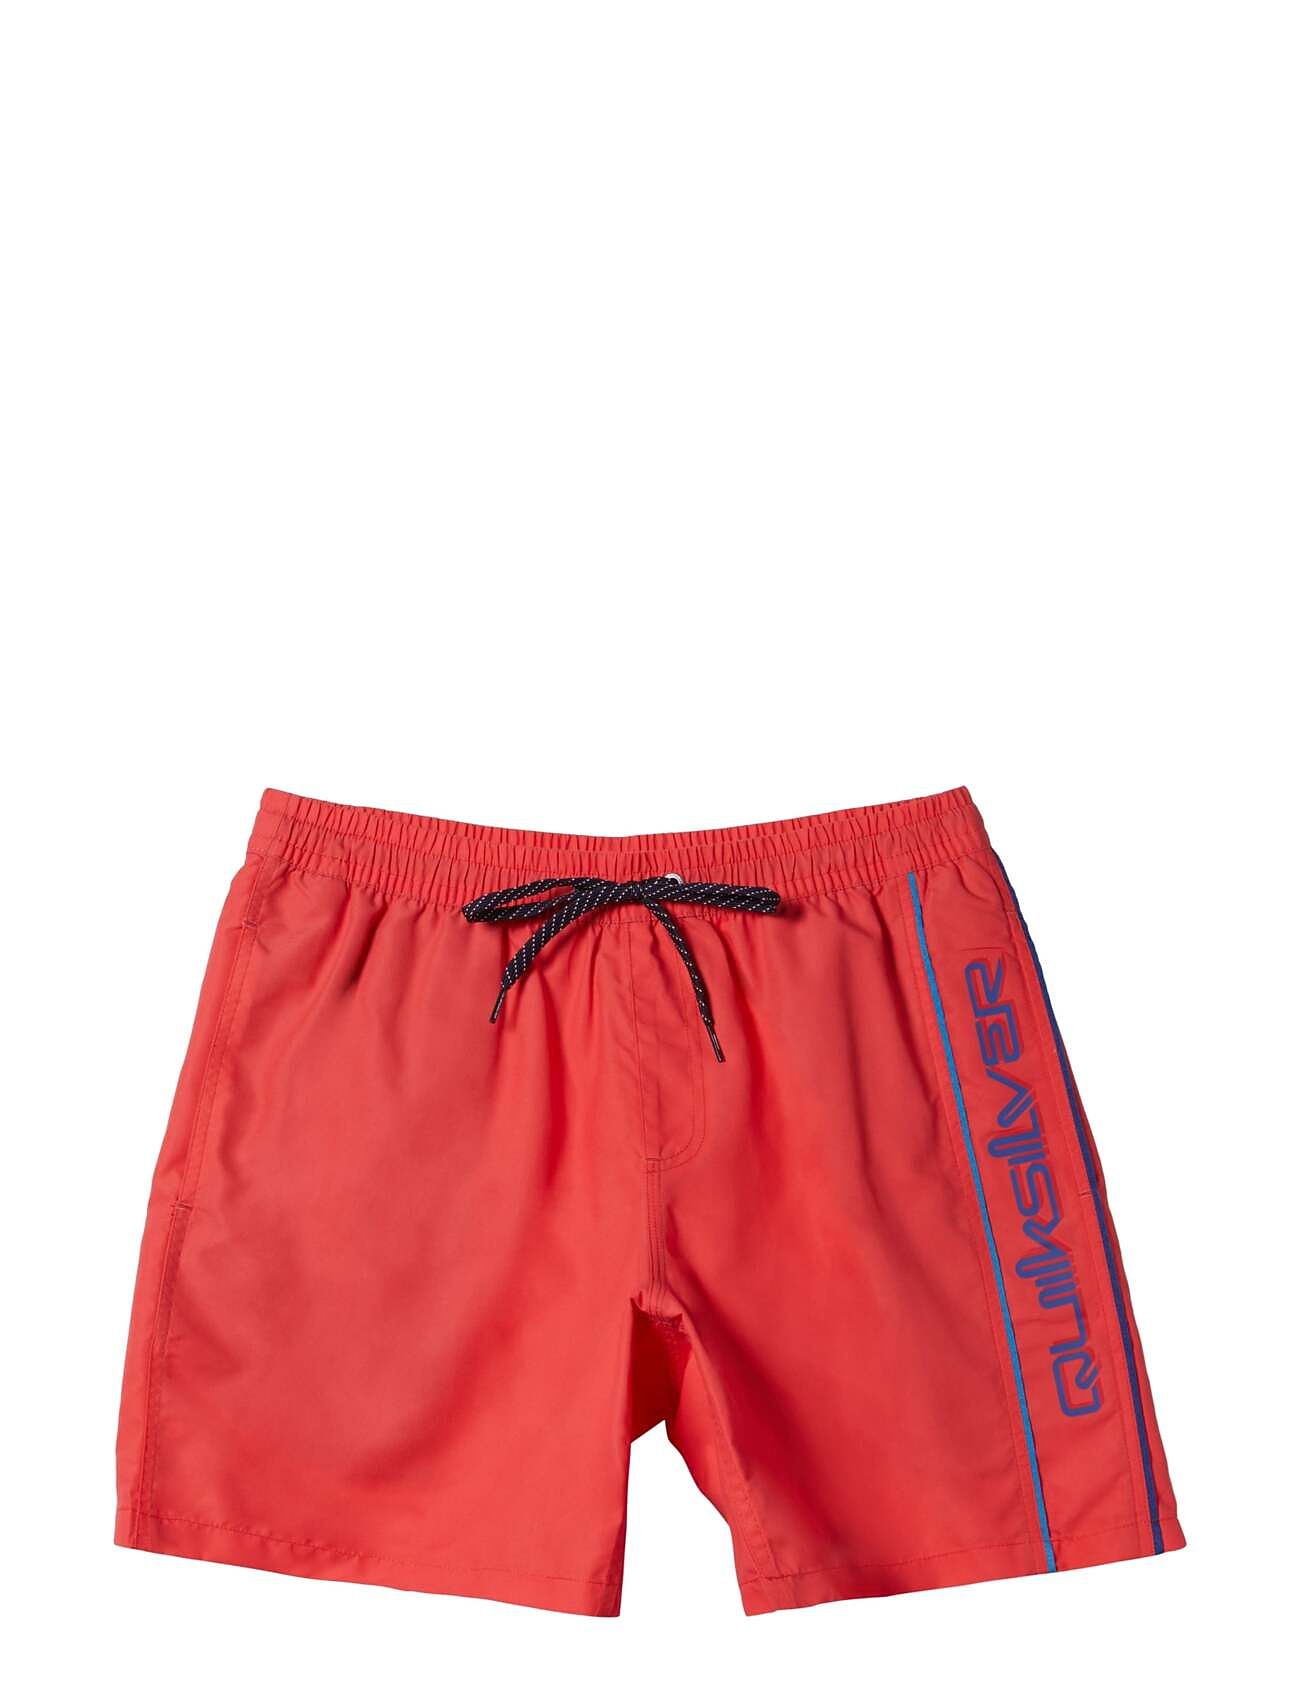 Everyday Vert Volley Yth 14 Badeshorts Red Quiksilver